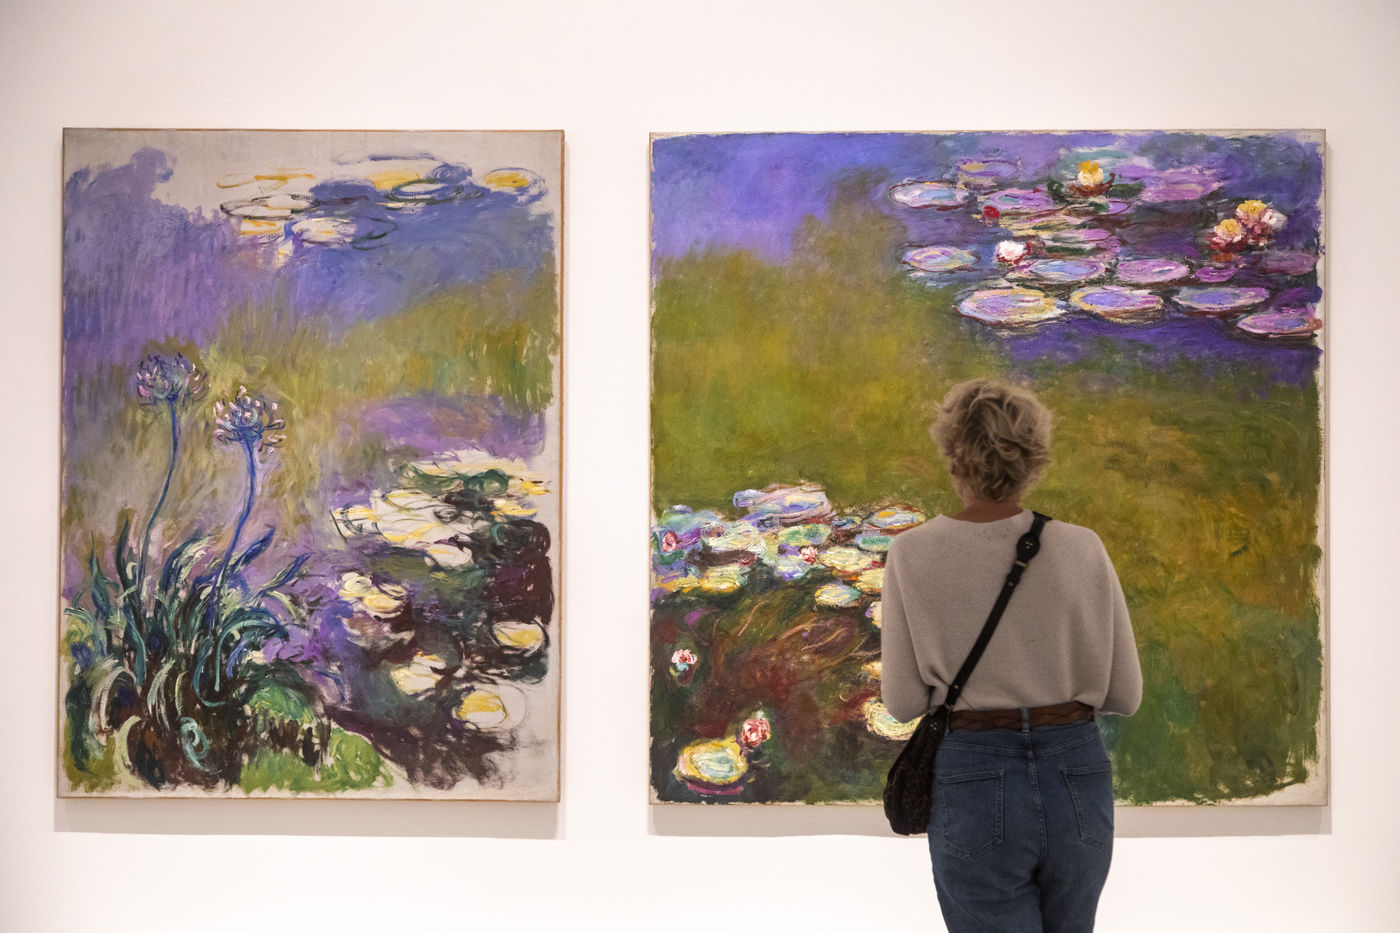 EXPO  Monet - Mitchell at the Fondation Louis Vuitton